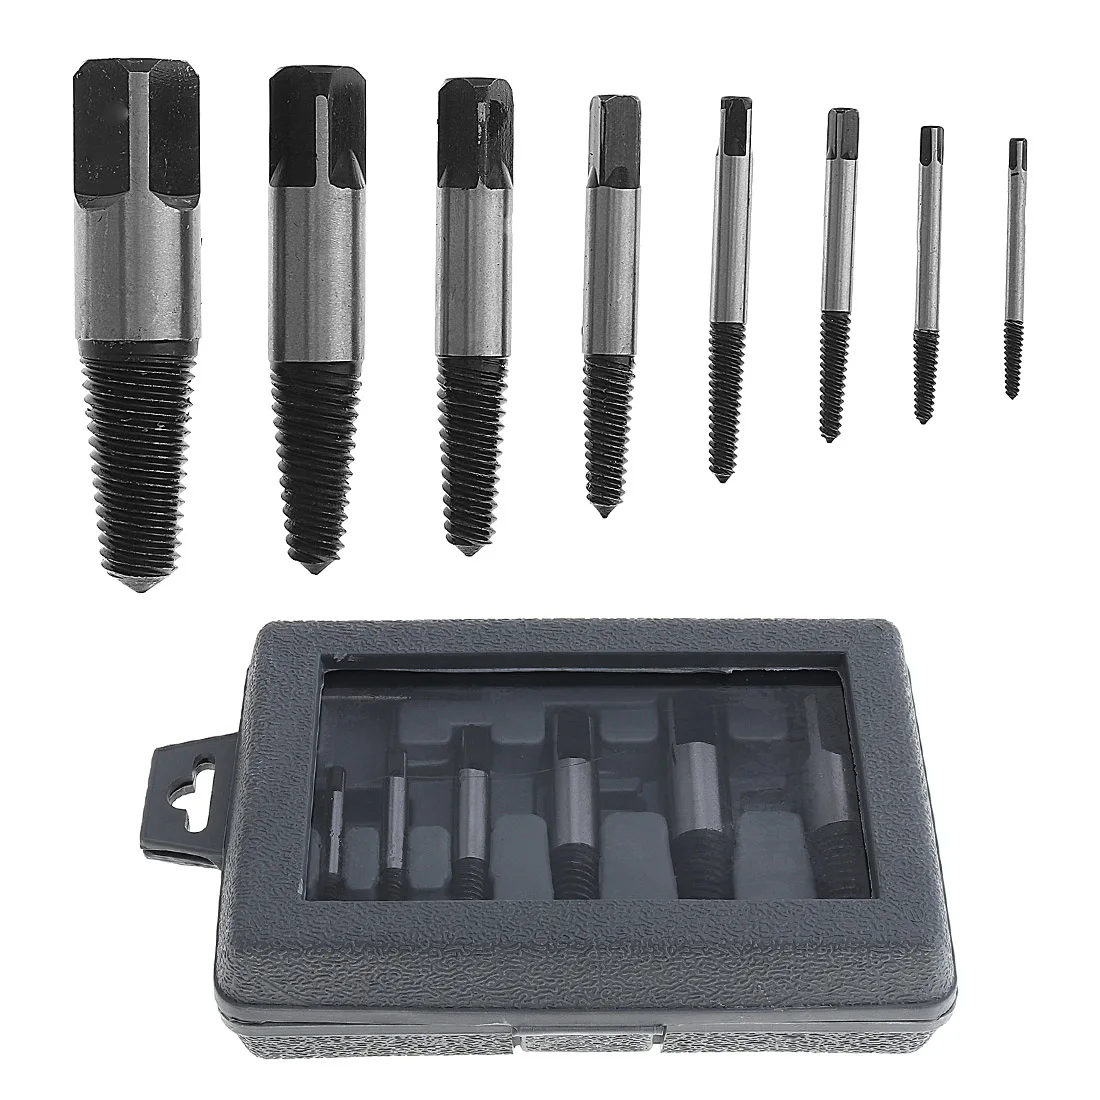 8pcs Broken Screw Extractor High Quality Carbon Steel Drill Bits Set Damaged Bolt Remove Out Tools Kits